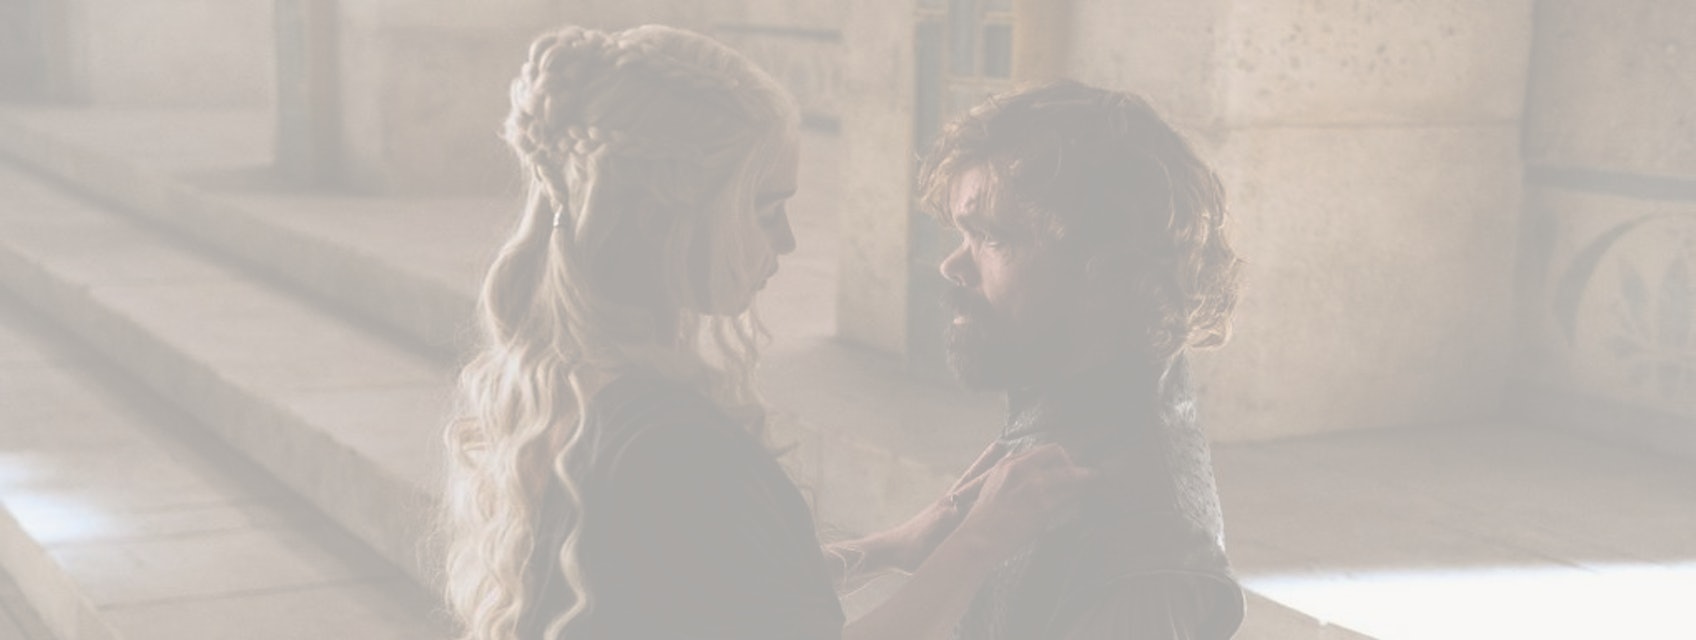 Game Of Thrones Season 8 Episode 4 Spoilers Why Tyrion Will